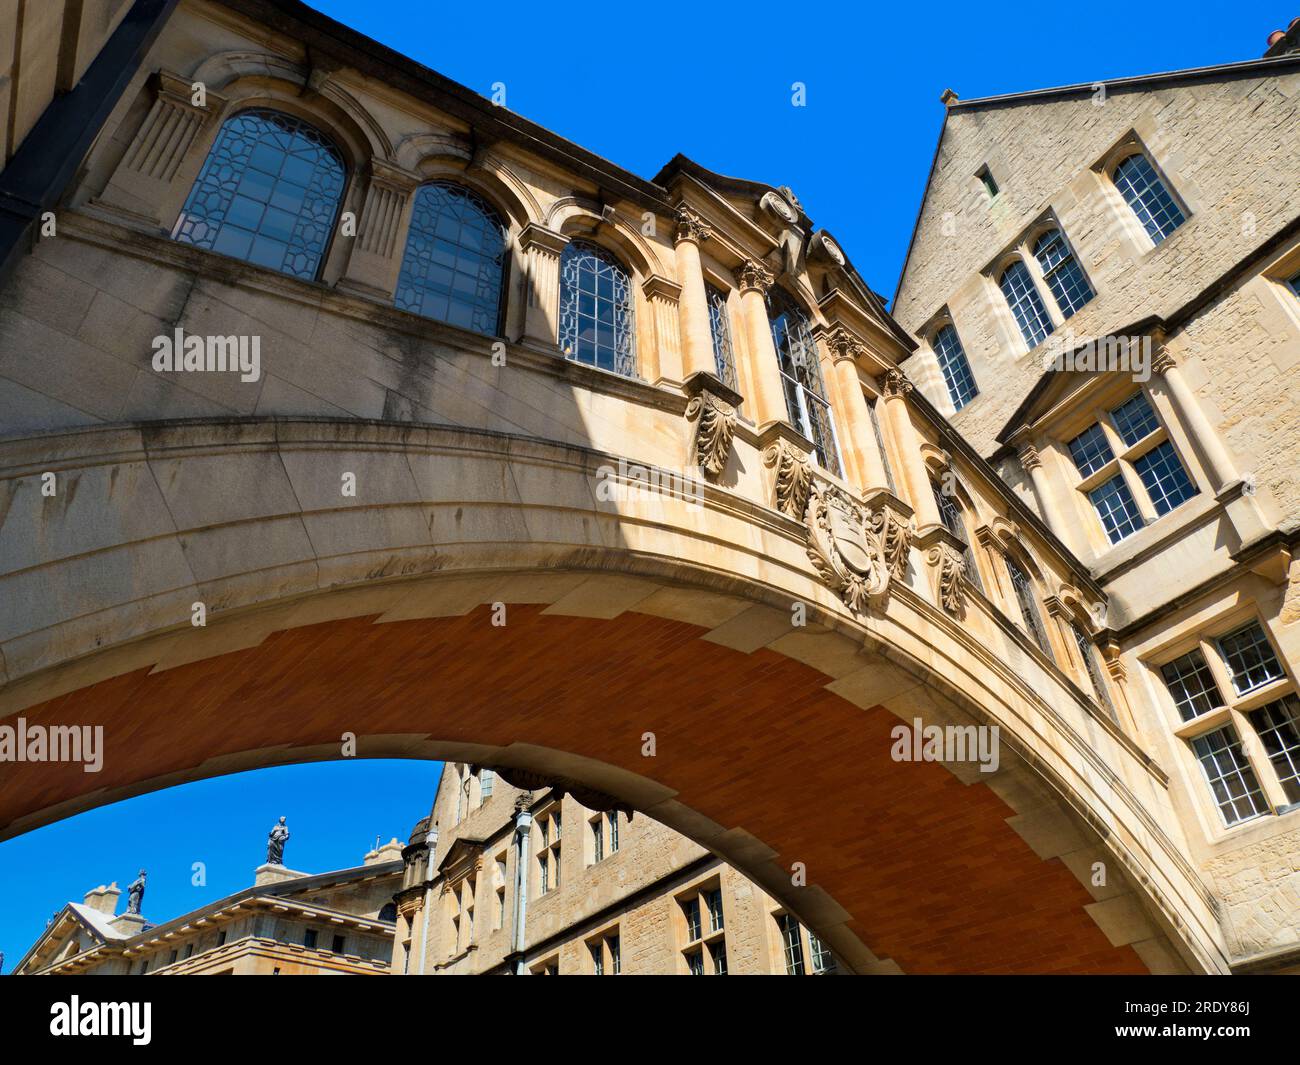 Linking two parts of Hertford College, Oxford, its landmark Hertford Bridge - often dubbed The Bridge of Sighs was actually completed in 1914. Strange Stock Photo